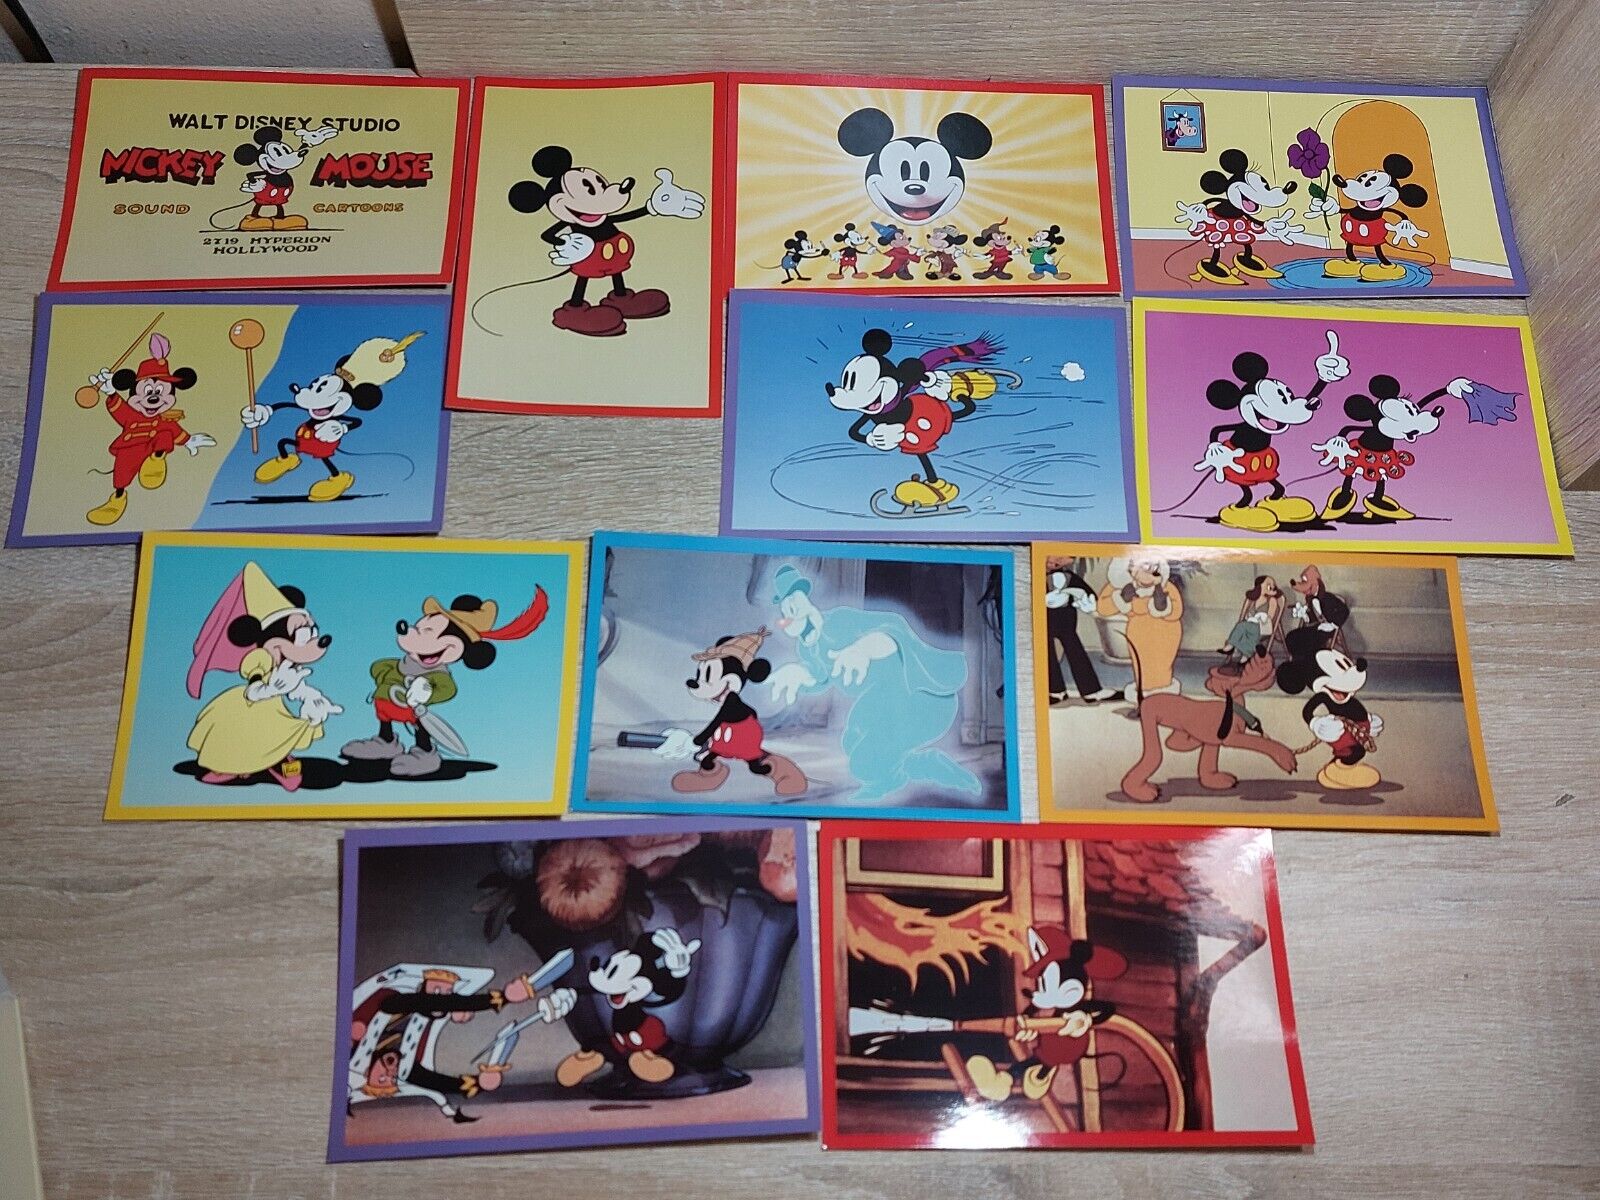 VTG Disney Mickey Mouse Classic Collection Of 12 Post Cards 3.8”x5.8” USA